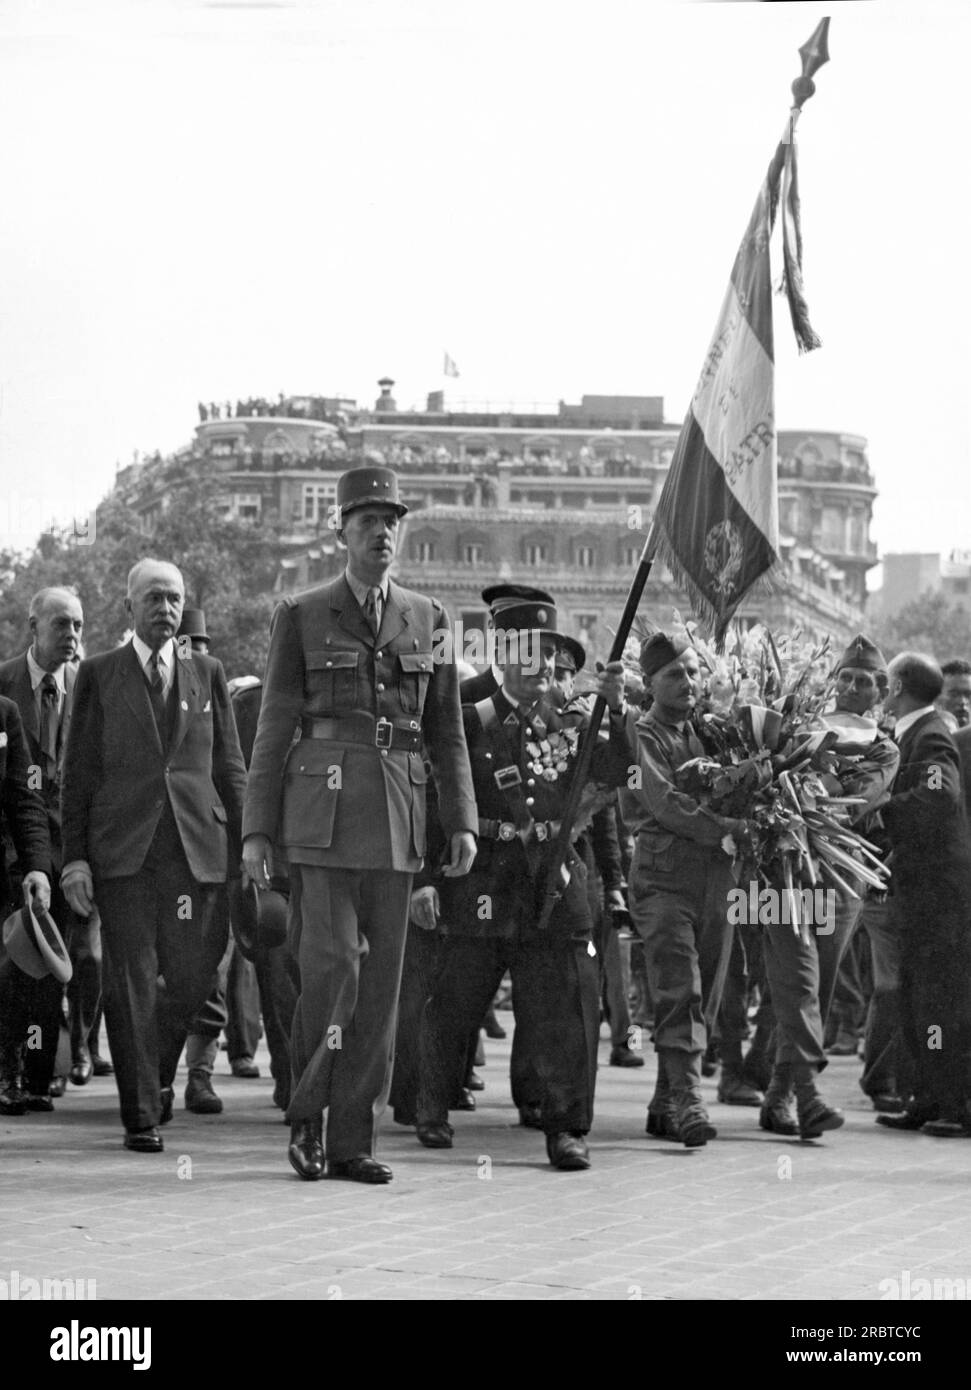 Paris, France:  August 27, 1944. General Charles de Gaulle walks up to place a wreath on the Tomb of the Unknown Solder beneath the Arc de Triomphe in Paris. Stock Photo